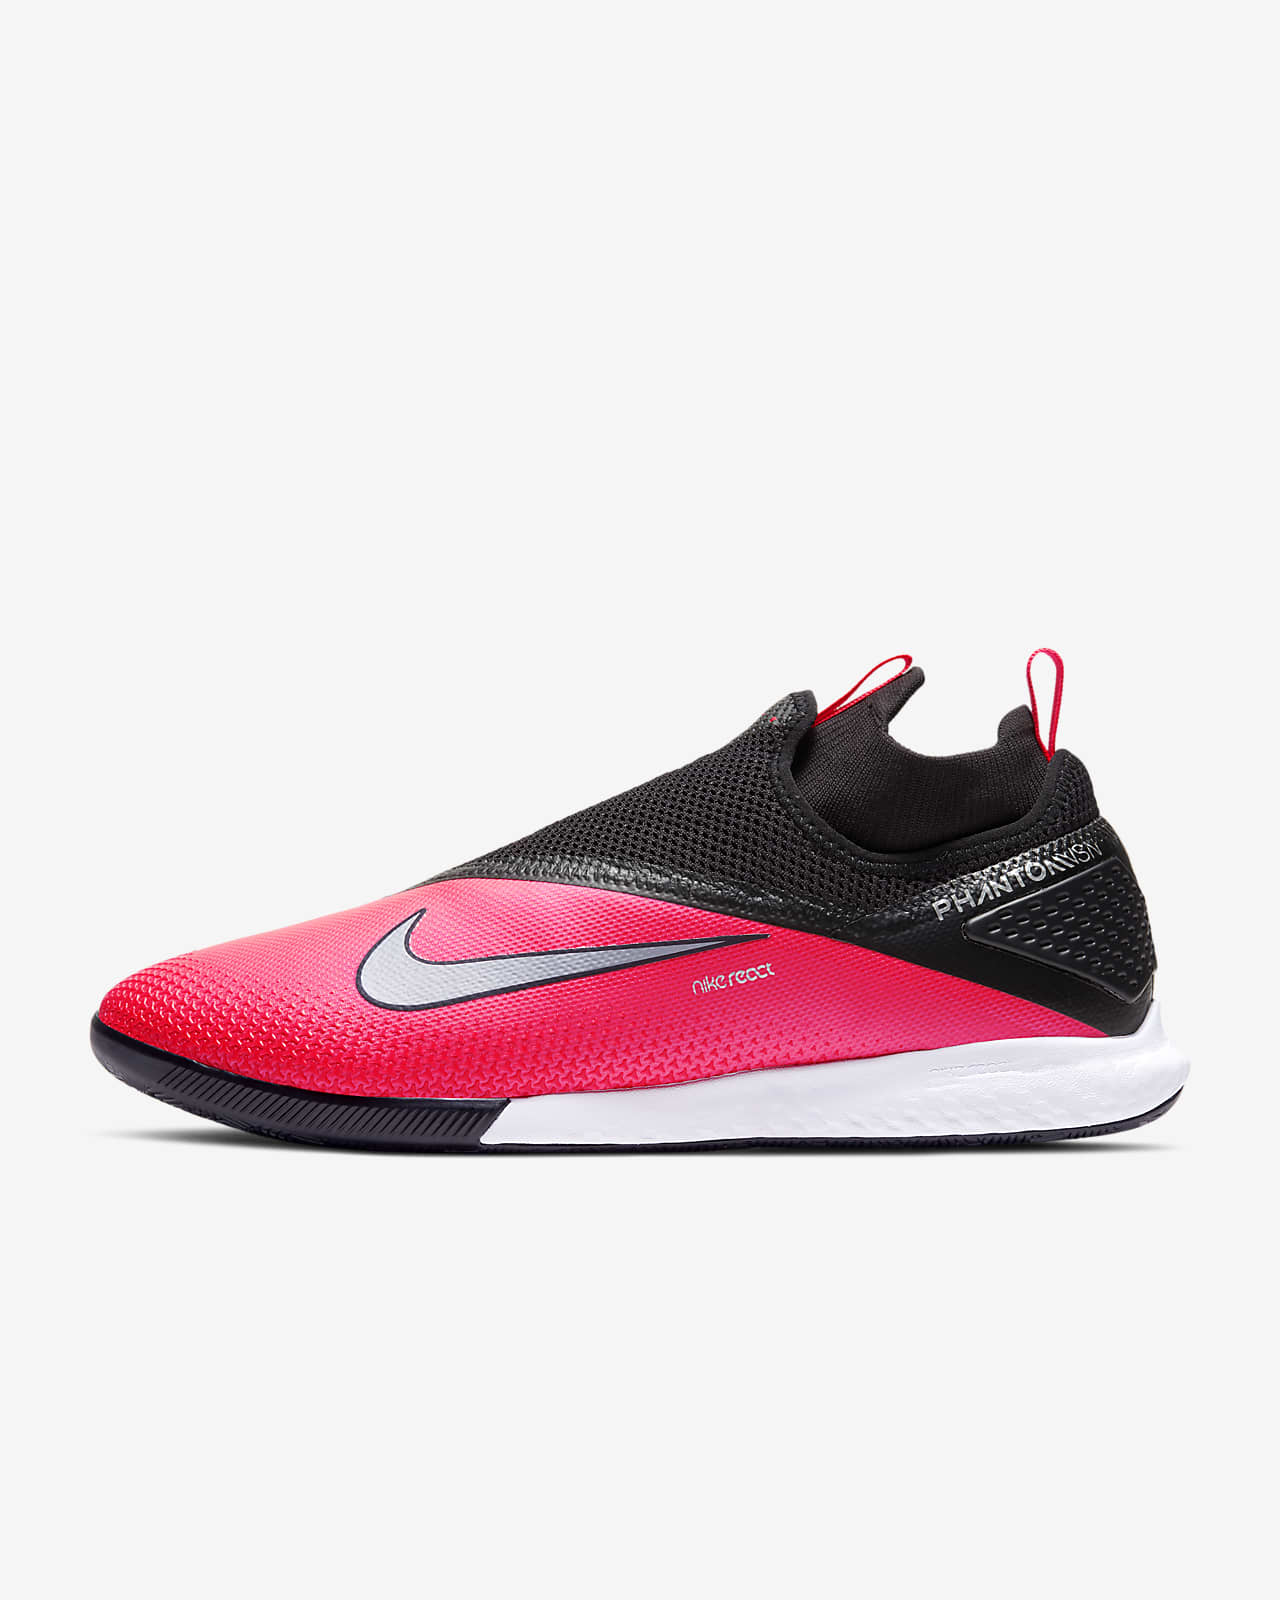 nike phantom vision academy dynamic fit indoor soccer shoes